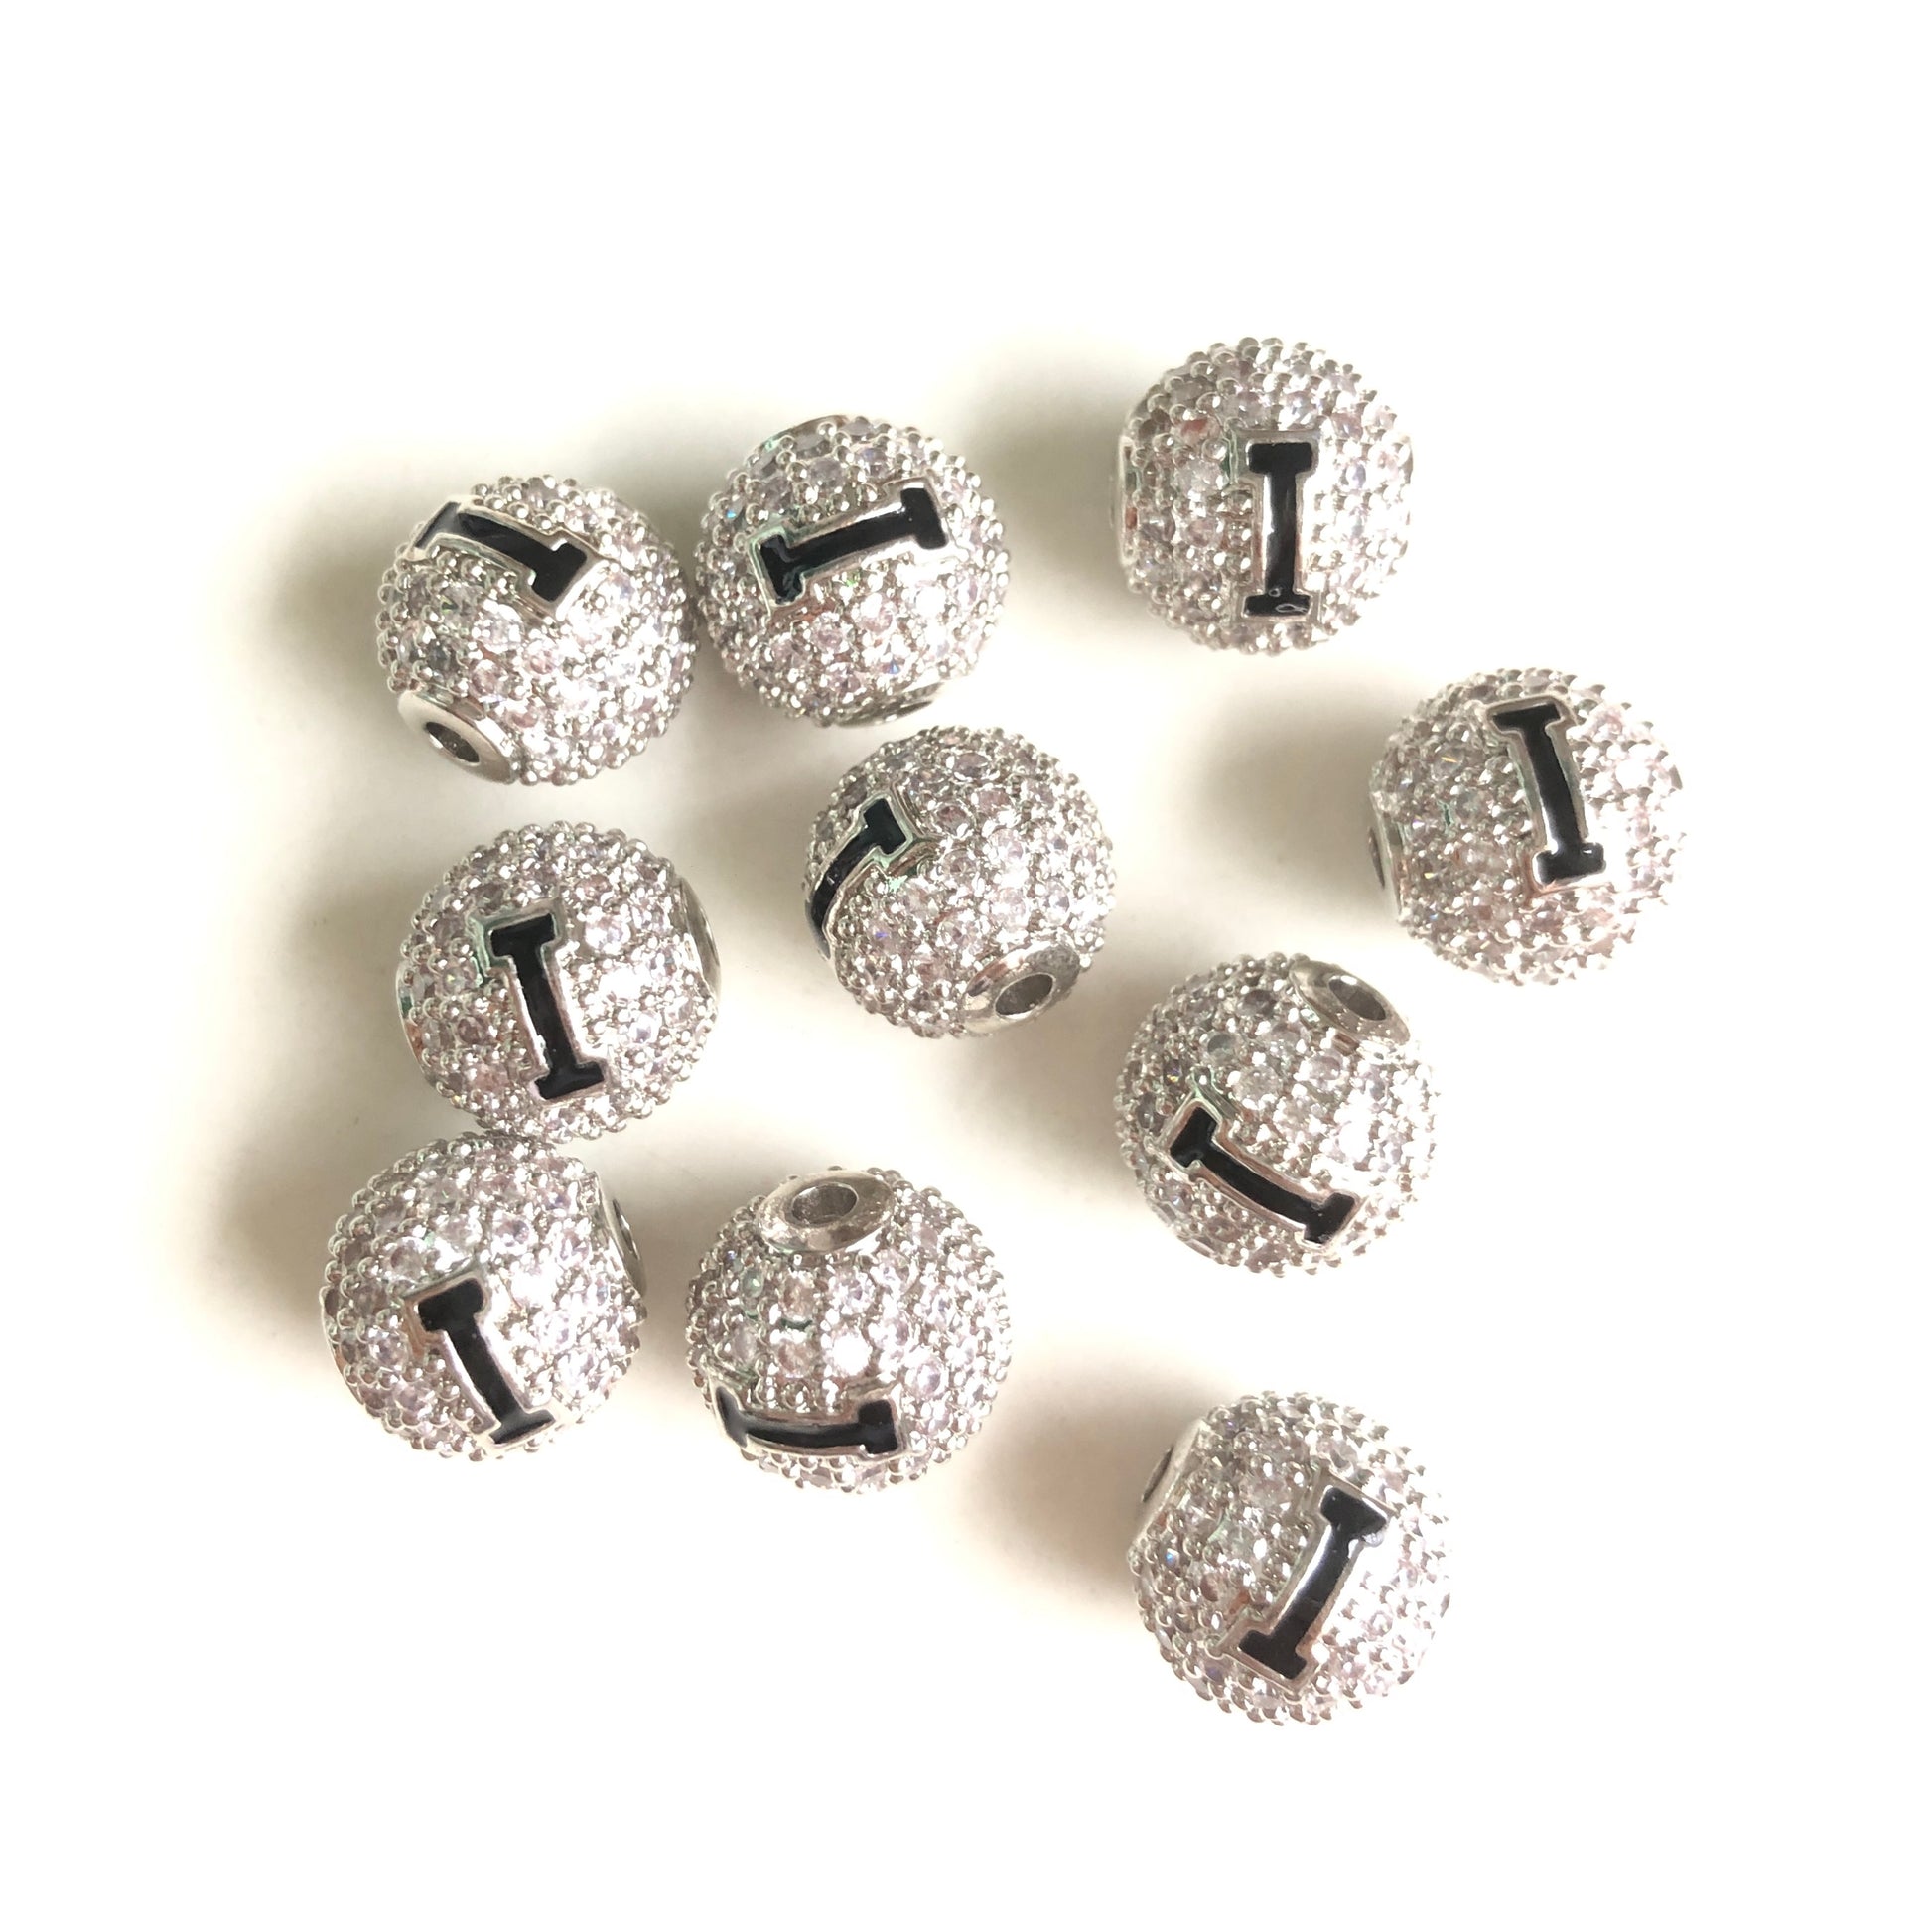 10-20pcs/lot 10mm Enamel Print CZ Paved "I" Initial Alphabet Letter Ball Spacers Beads Silver CZ Paved Spacers 10mm Beads Ball Beads New Spacers Arrivals Charms Beads Beyond